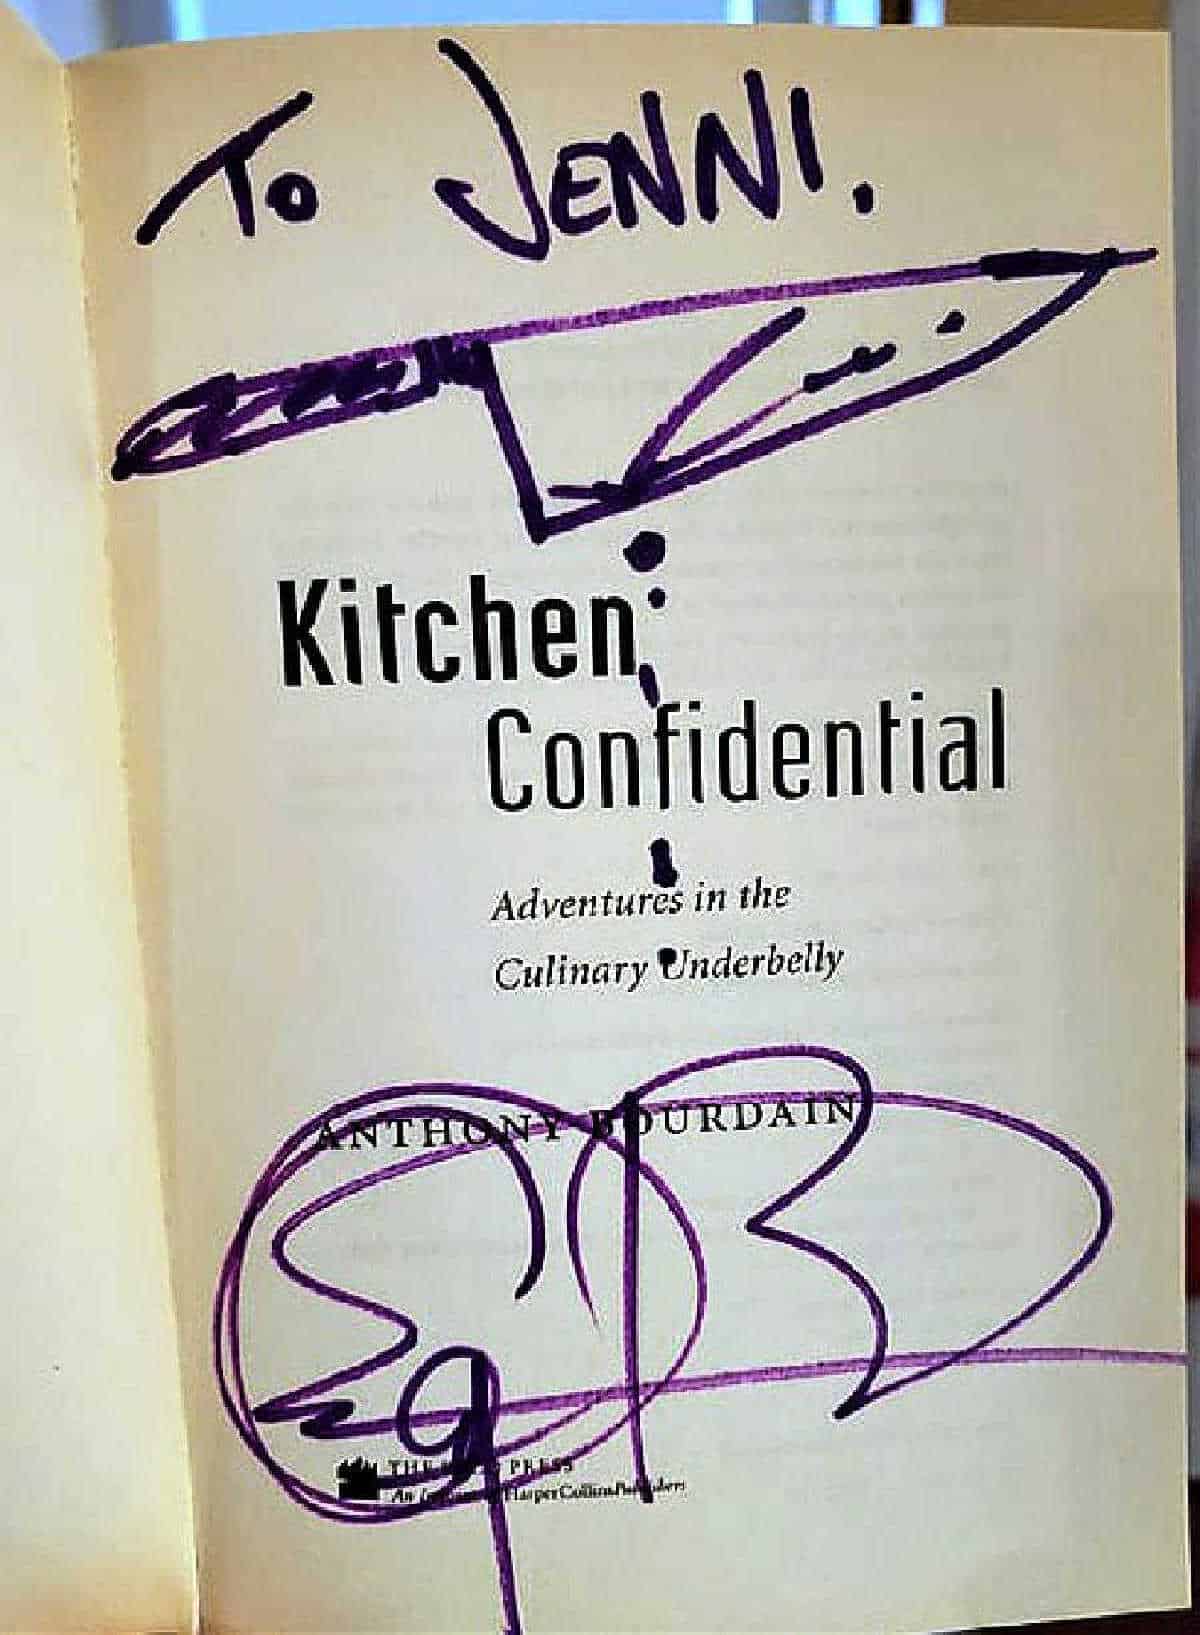 Inner title page of the book Kitchen Confidential, Adventures in the Culinary Underbelly, signed by Anthony Bourdain in purple marker: To Jenni, with a chef knife with "blood" dripping down and then his signature at the bottom of the page.